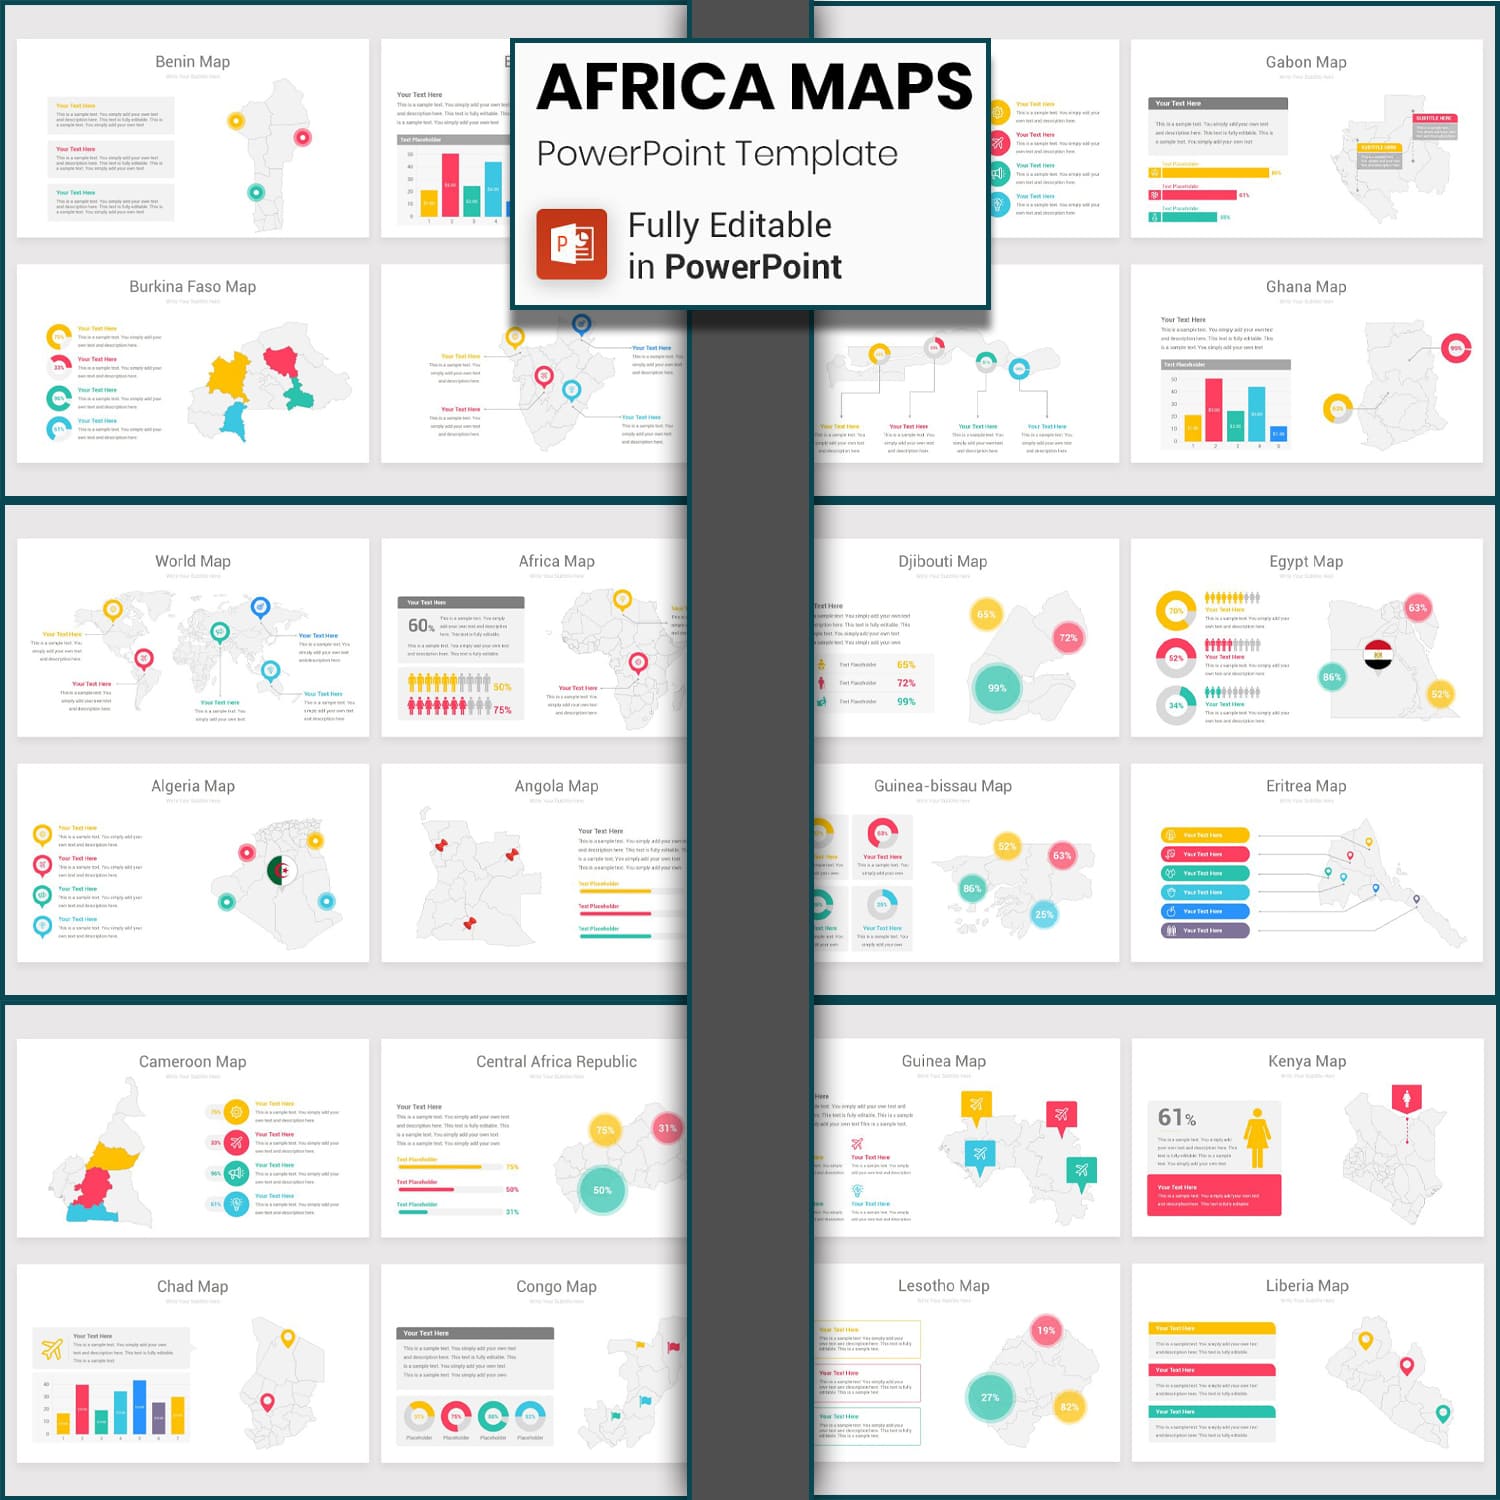 Africa Maps PowerPoint Template cover image.